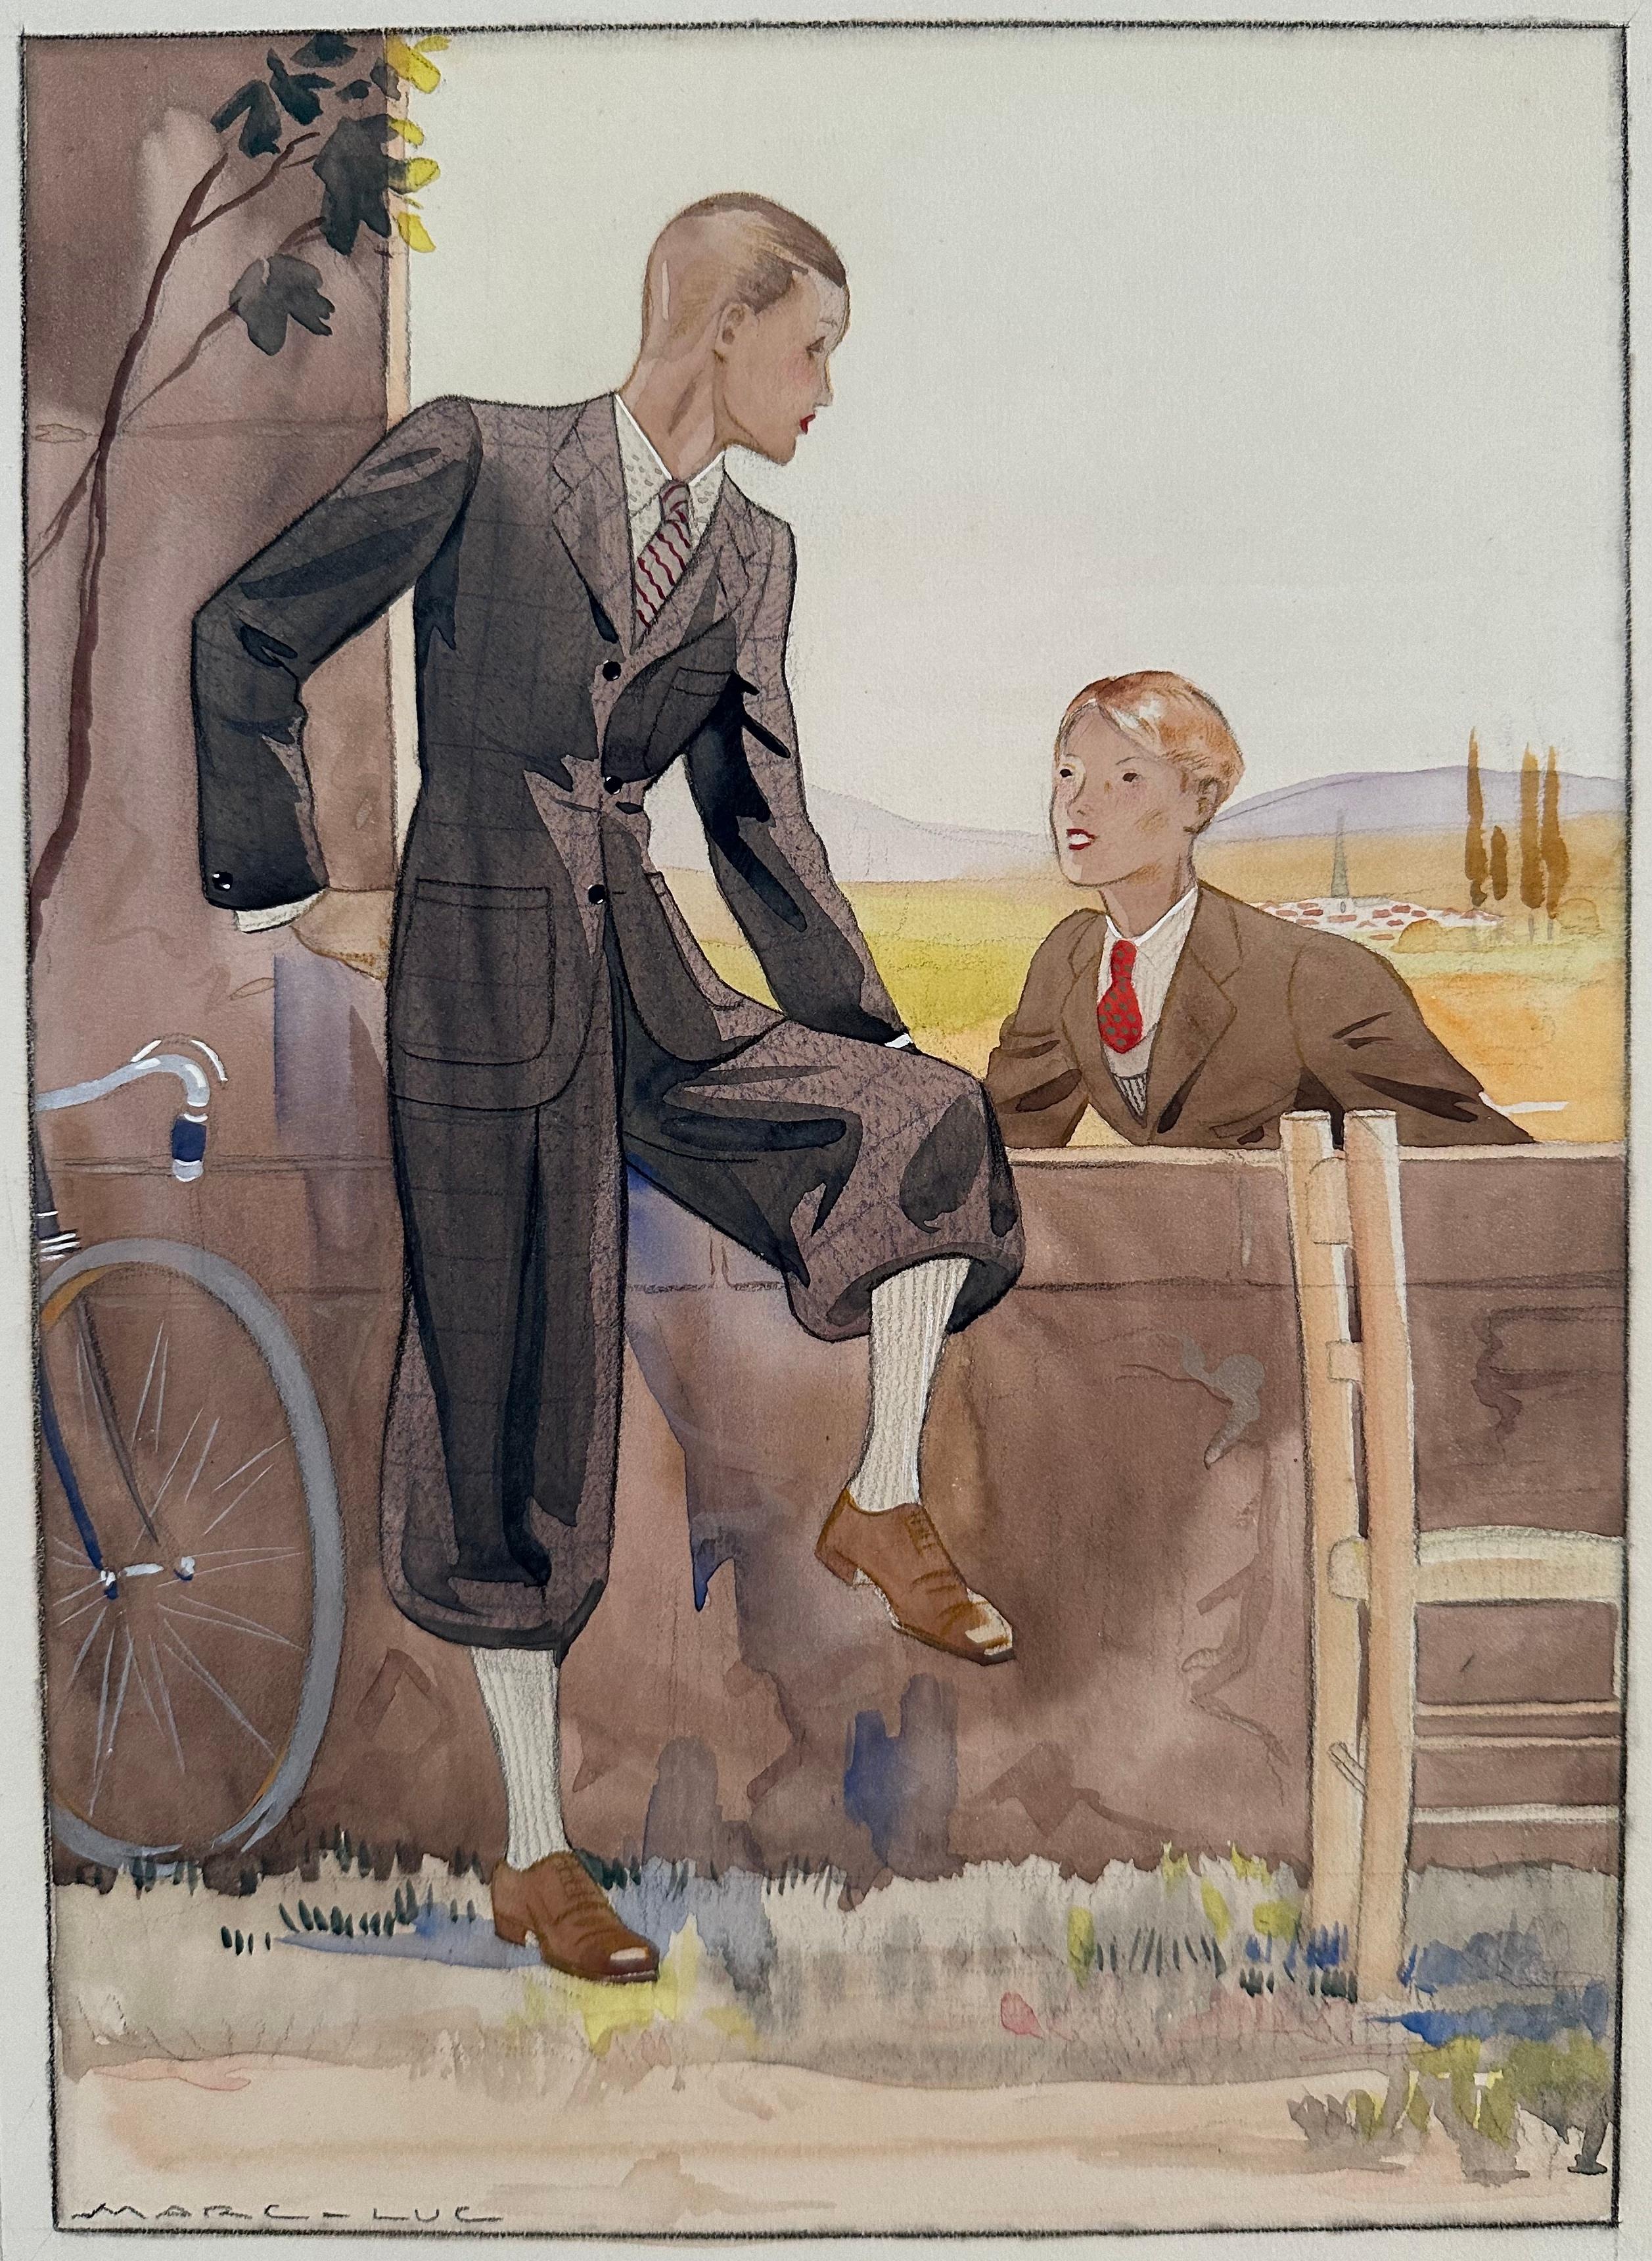 Two Boys (Art Deco Knickers Suit Bicycle riding Attire Fashion Illustration). 